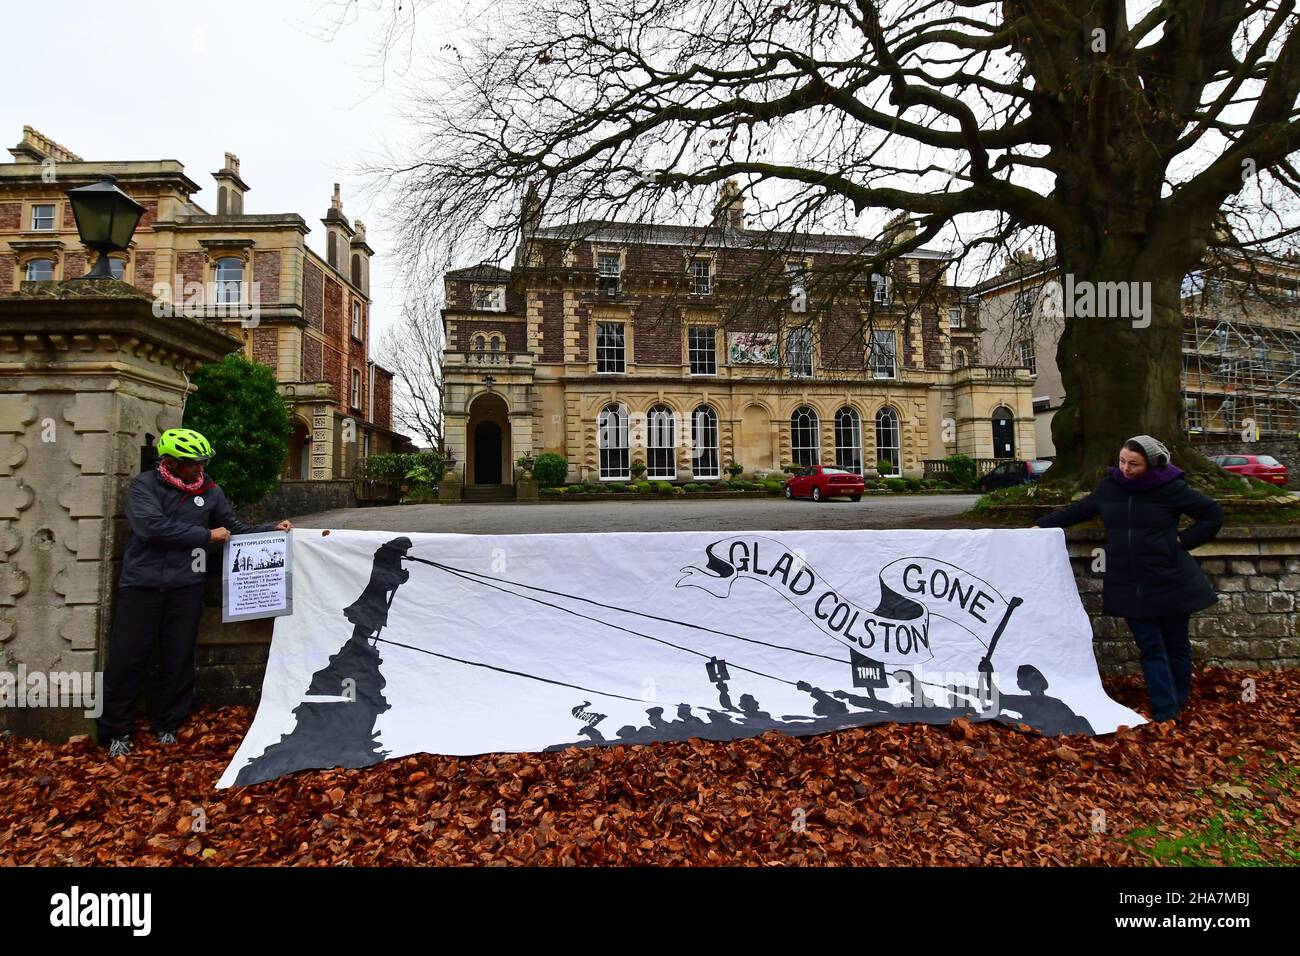 Bristol, UK. 11th Dec, 2021. On a mild and damp morning a large white Banner with Glad Colston Gone was drapped over the front wall of Merchant Hall on the promenade clifton in Bristol. This is about the Toppling of The Colston Statue in the city a year ago. This is the eve of the Eight Day Trial set to begin on Monday.Merchants Hall is the Headquarters of the society of the Merchant Ventures. Credit: Robert Timoney/Alamy Live News Stock Photo